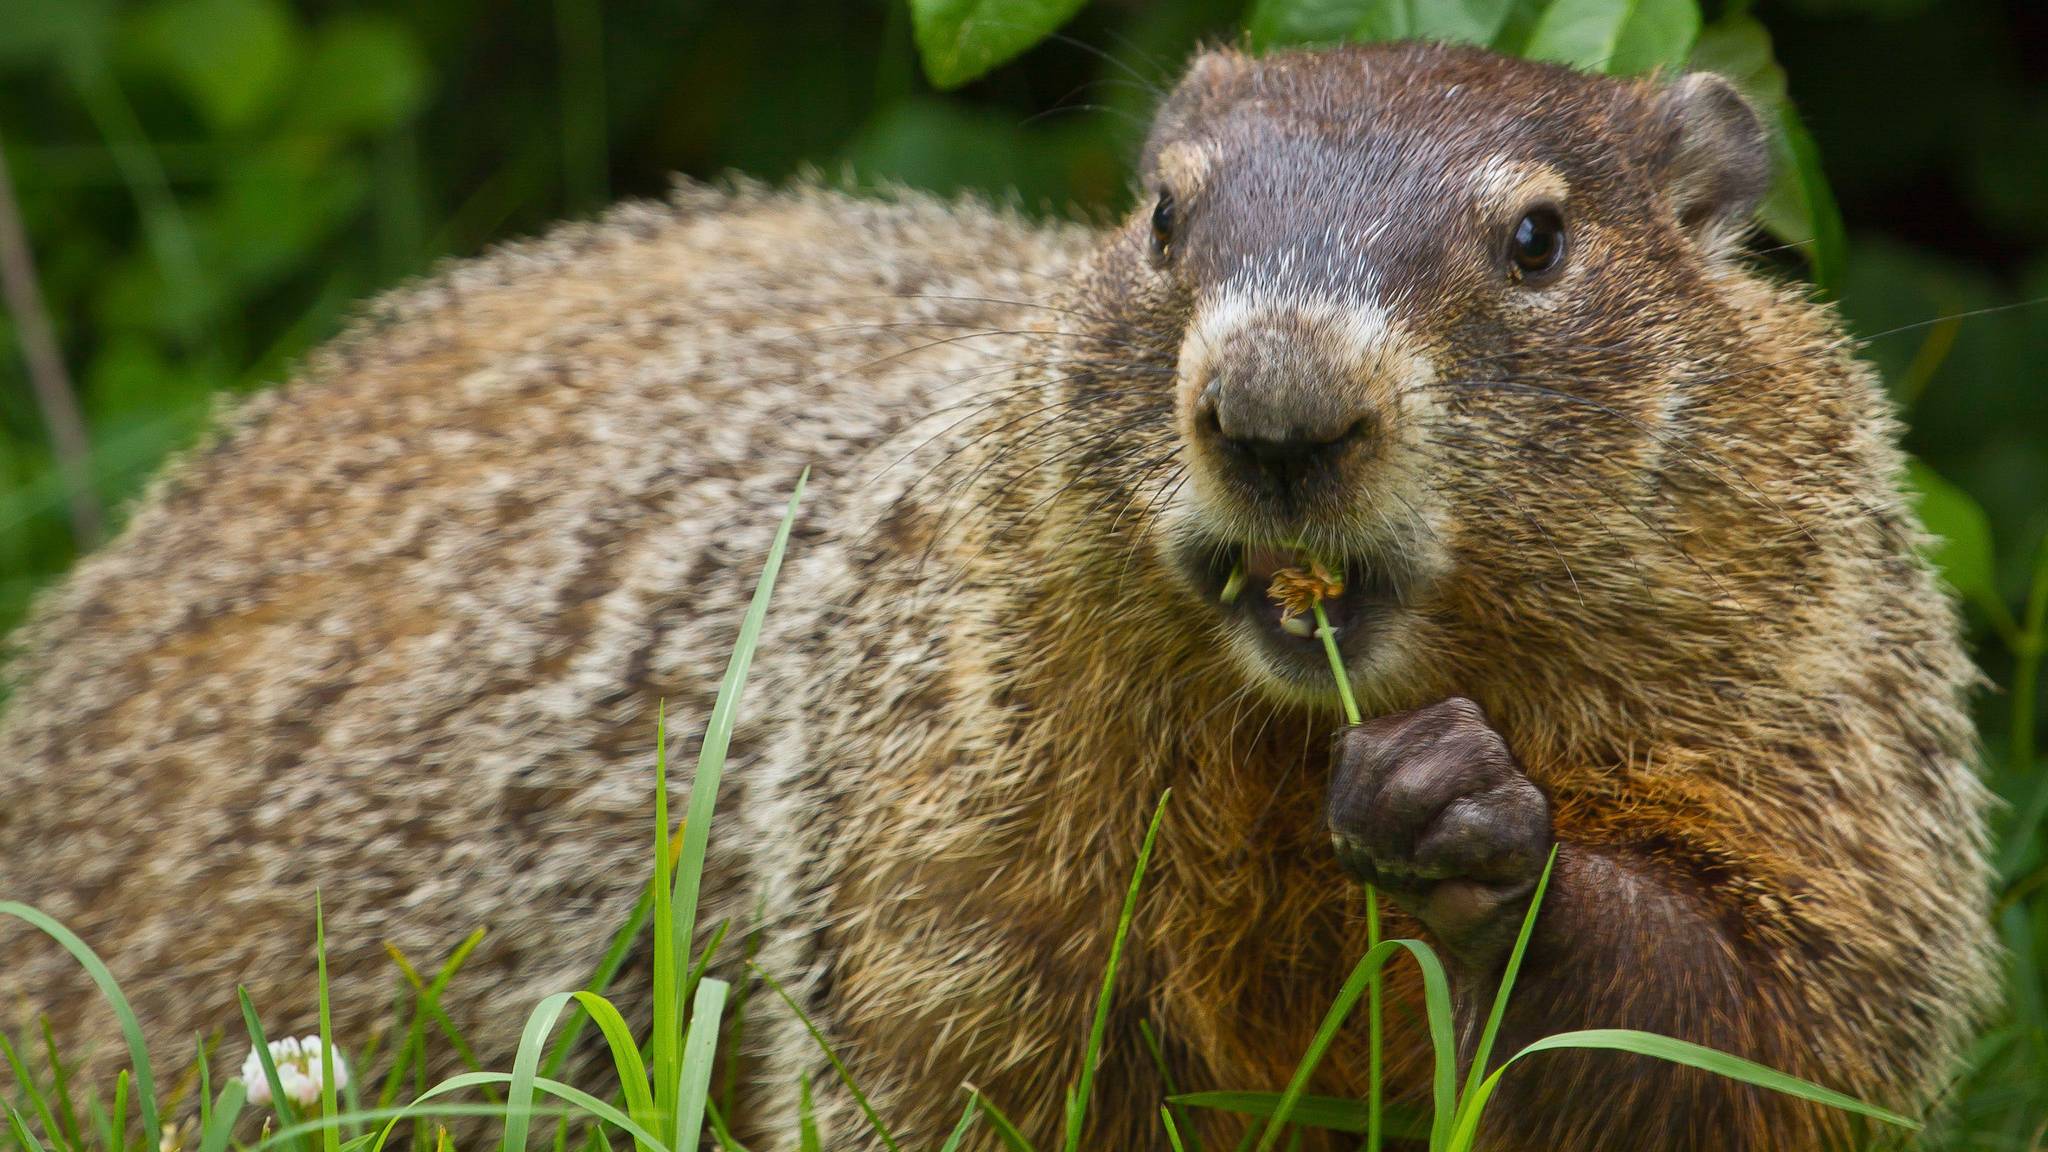 It’s Groundhog Day. Let’s Get To Know the Real Critter Behind the